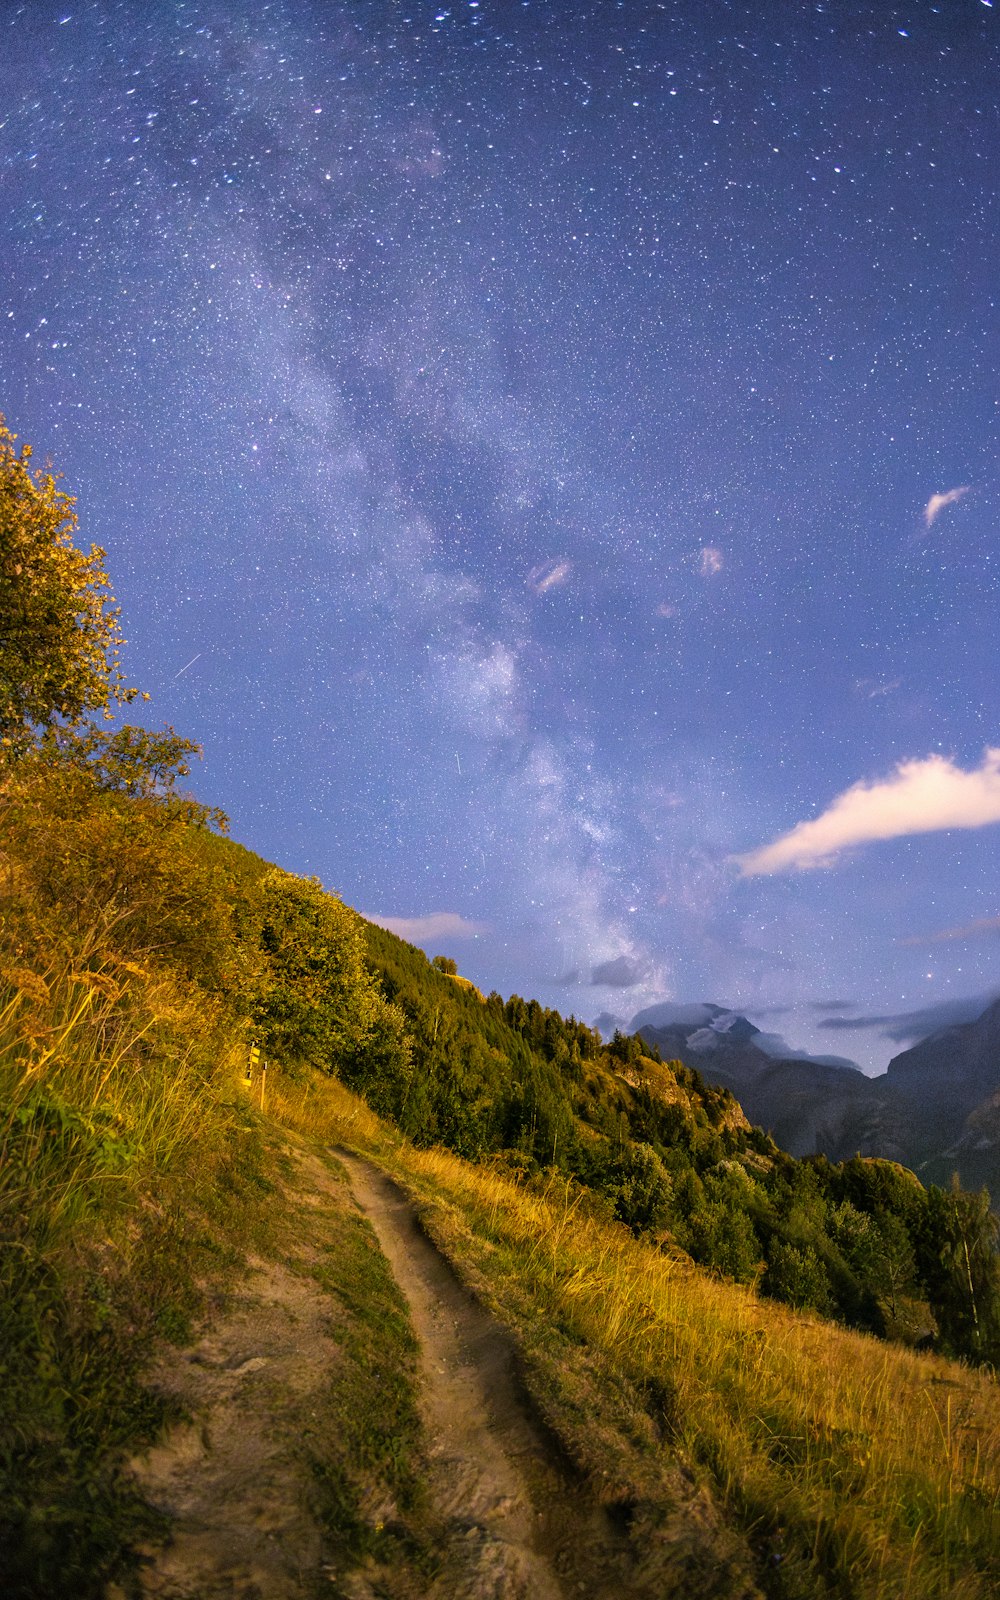 a dirt road going up a hill under a night sky filled with stars